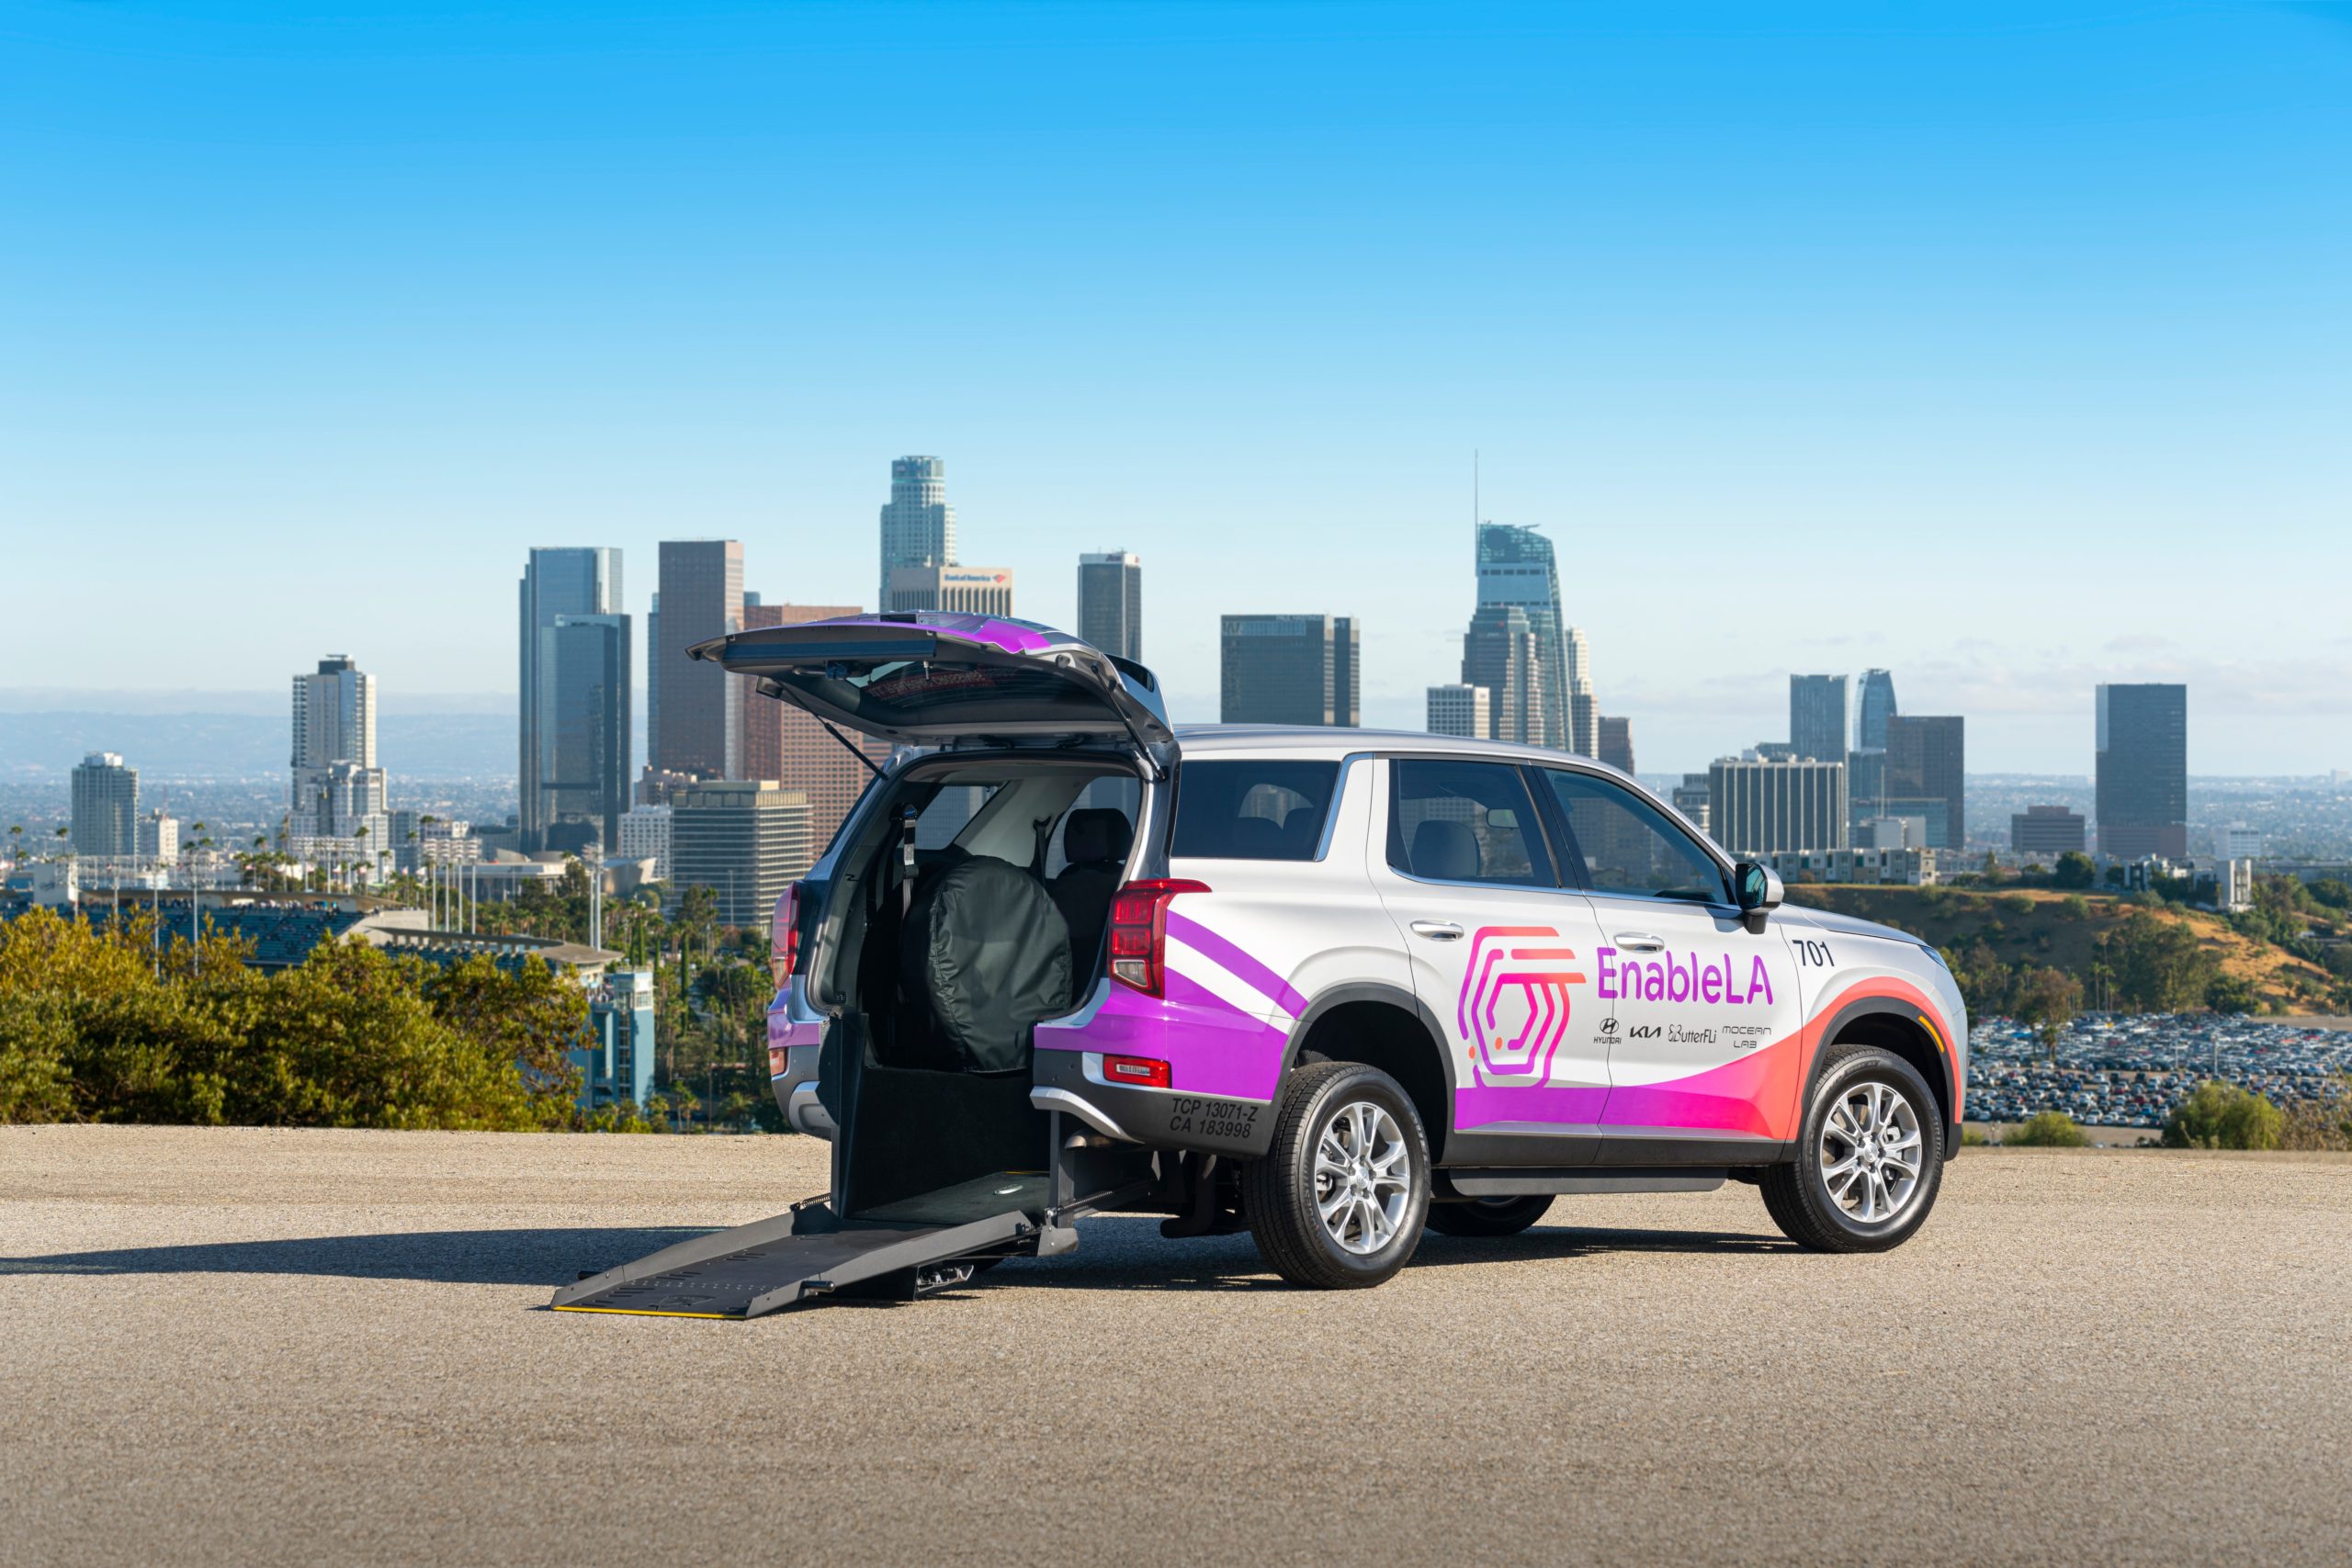 Hyundai Motor Group Launches 'EnableLA' to Assist People with Mobility Barriers in Los Angeles